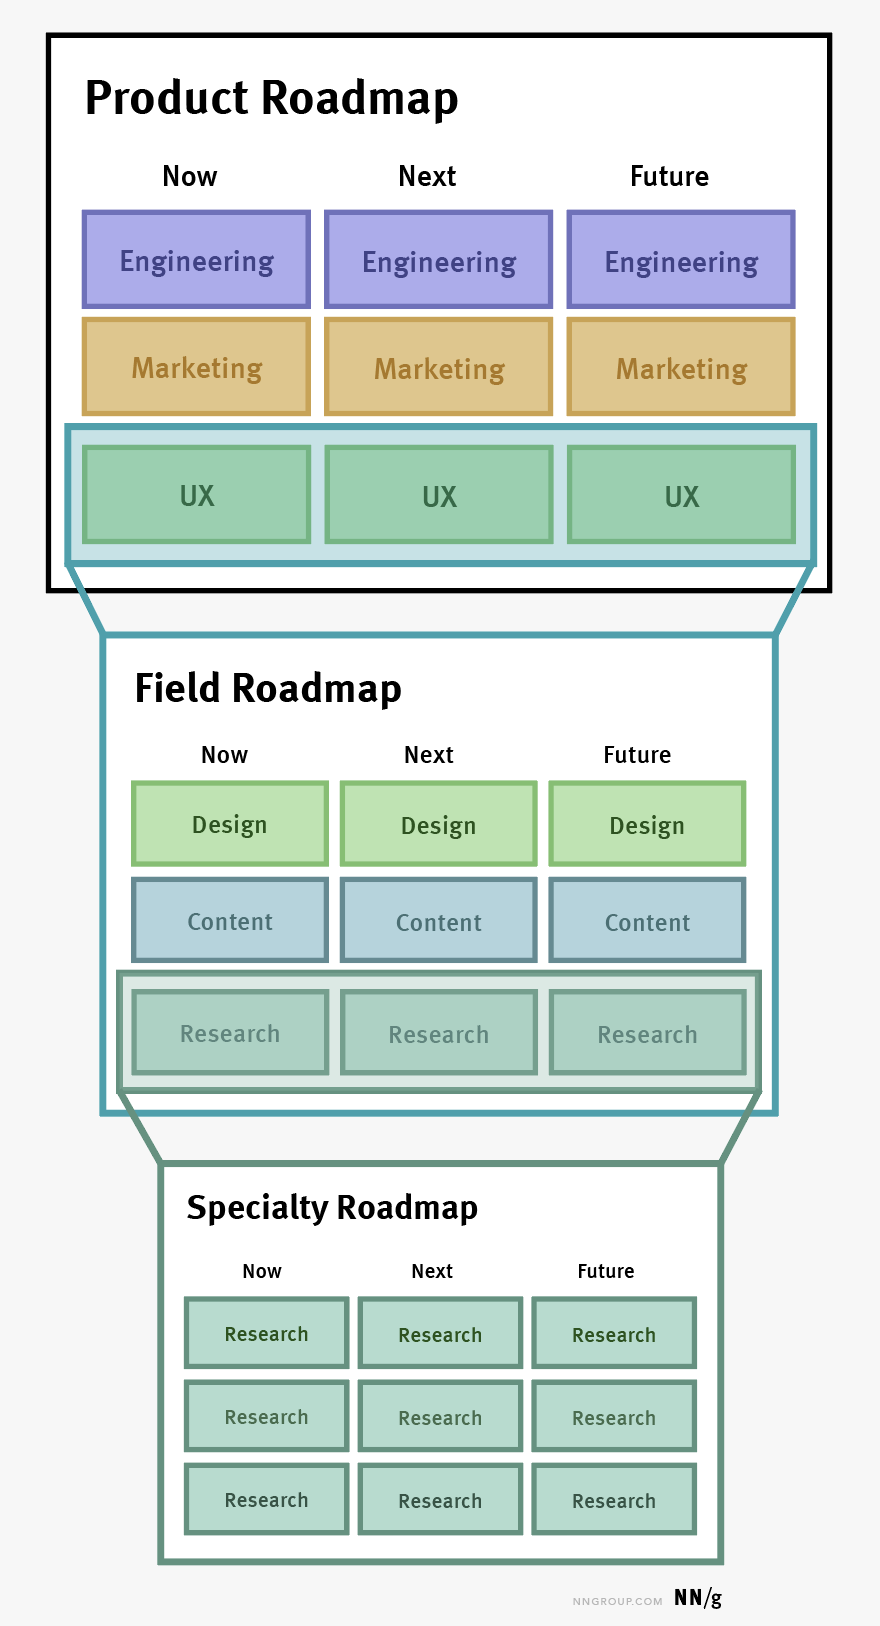 3 Types of Roadmaps: Product, Field, and Specialty 